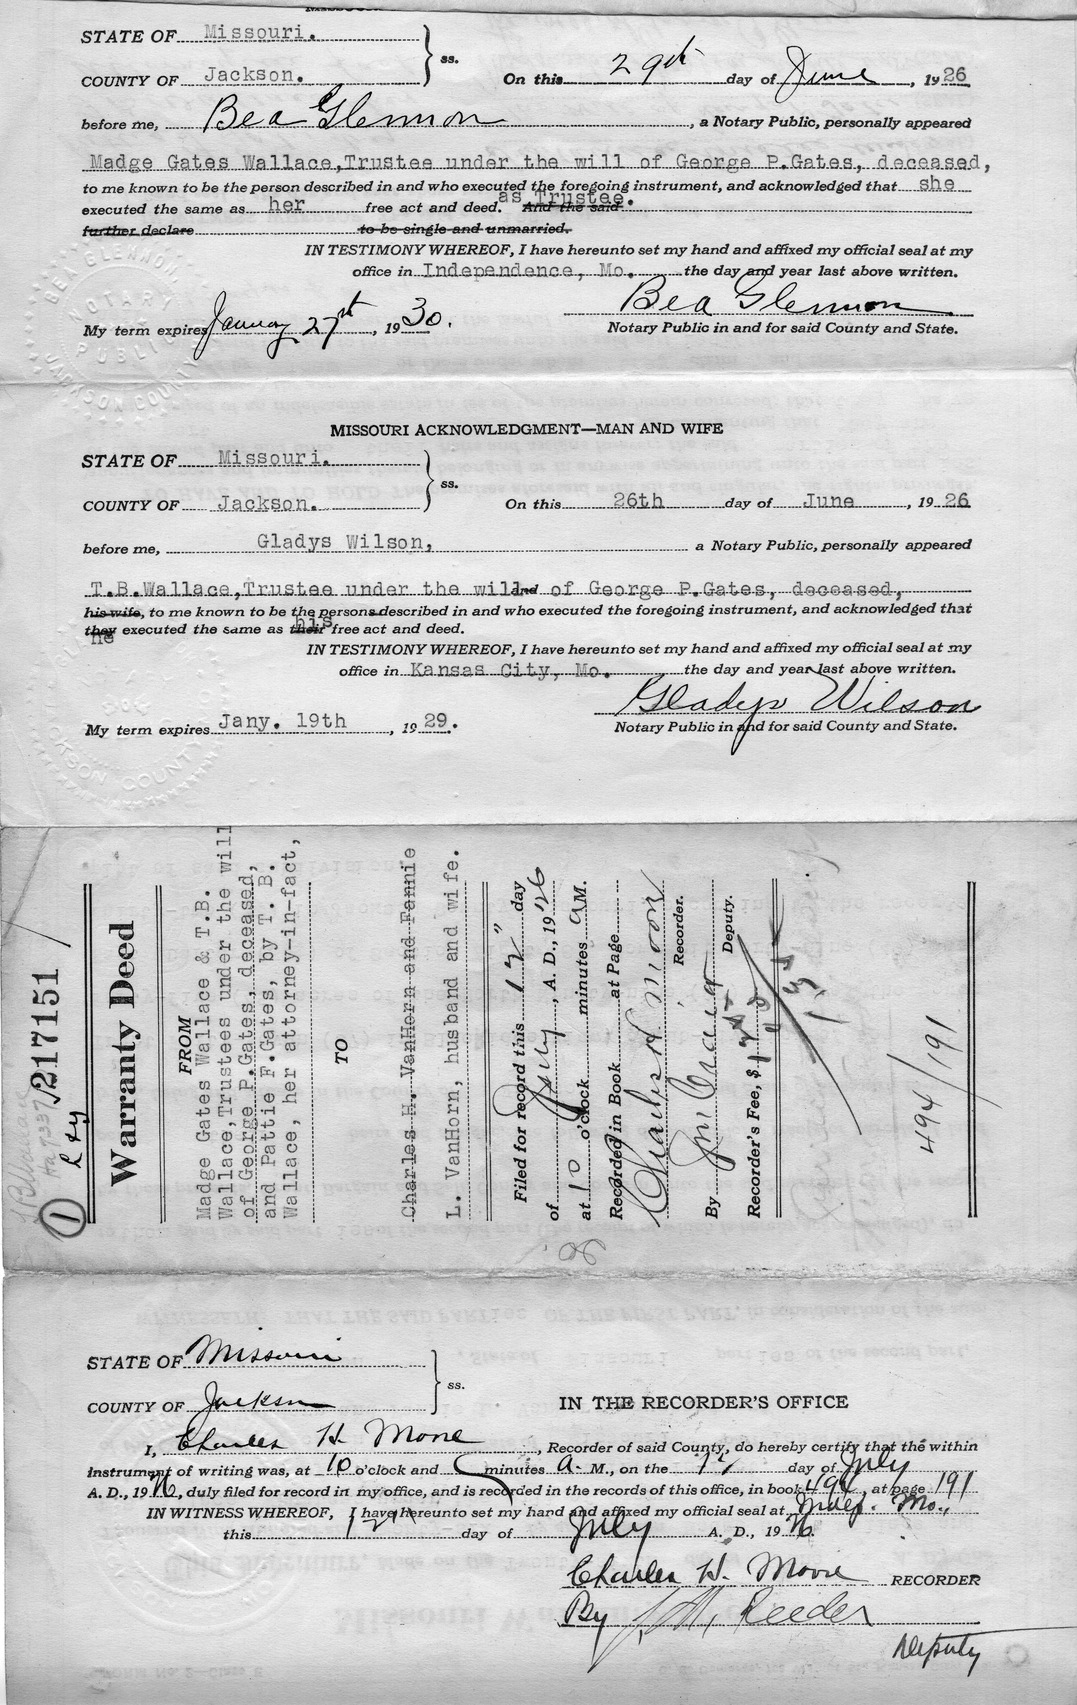 Warranty Deed from Madge Gates Wallace, T. B. Wallace, and Pattie P. Gates, to Charles H. Van Horn and Fannie L. Van Horn